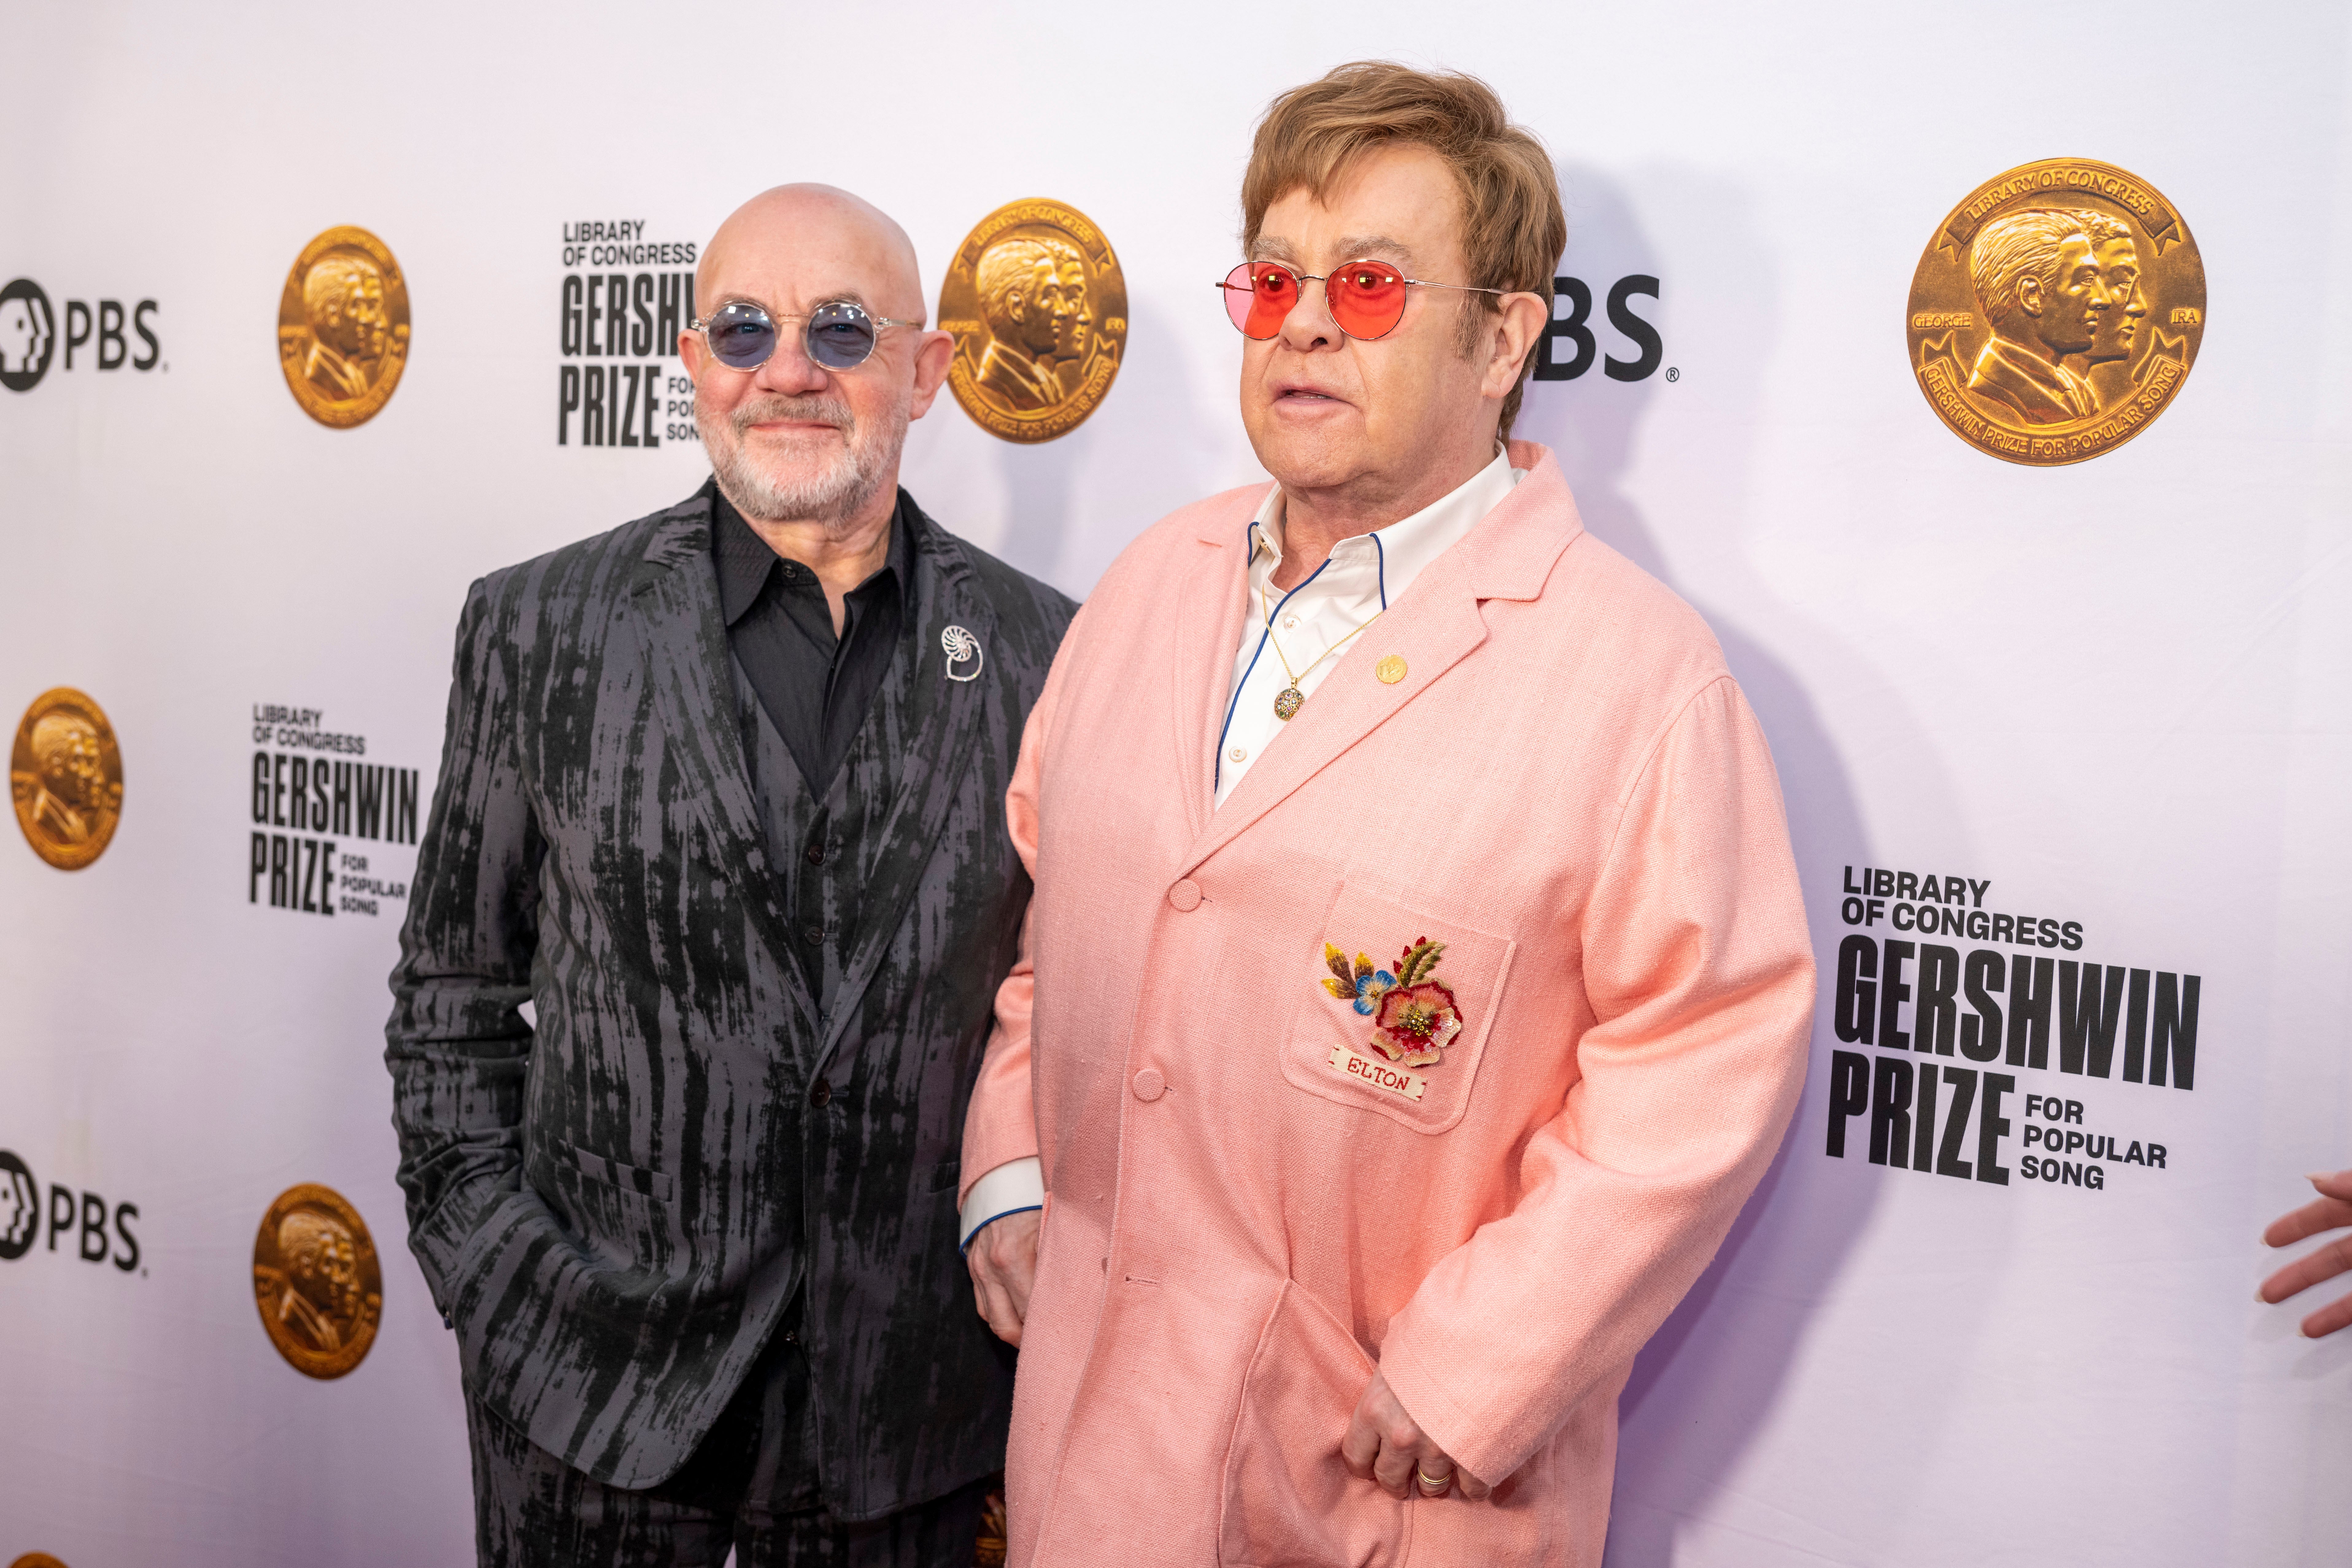 Bernie Taupin (left) was honoured for his songwriting contributions during his decades-long career